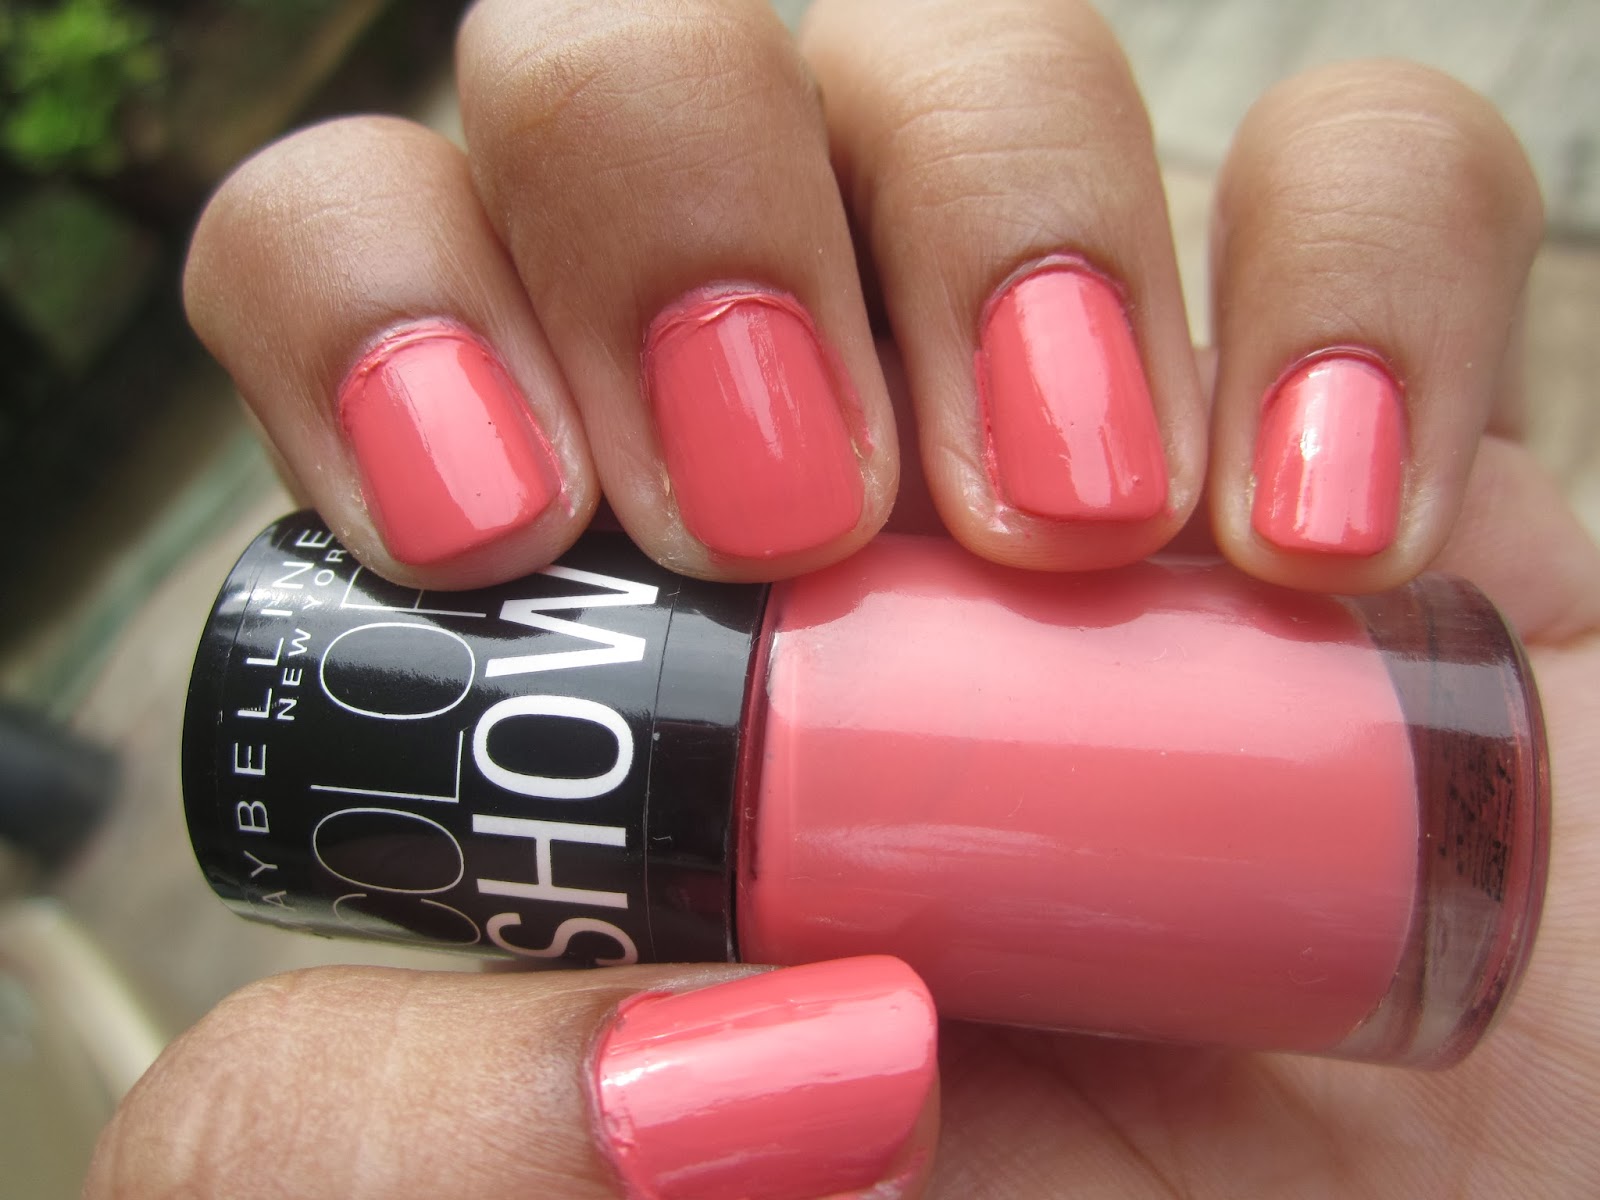 Maybelline Color Show Nail Polish in Coral Craze - wide 8